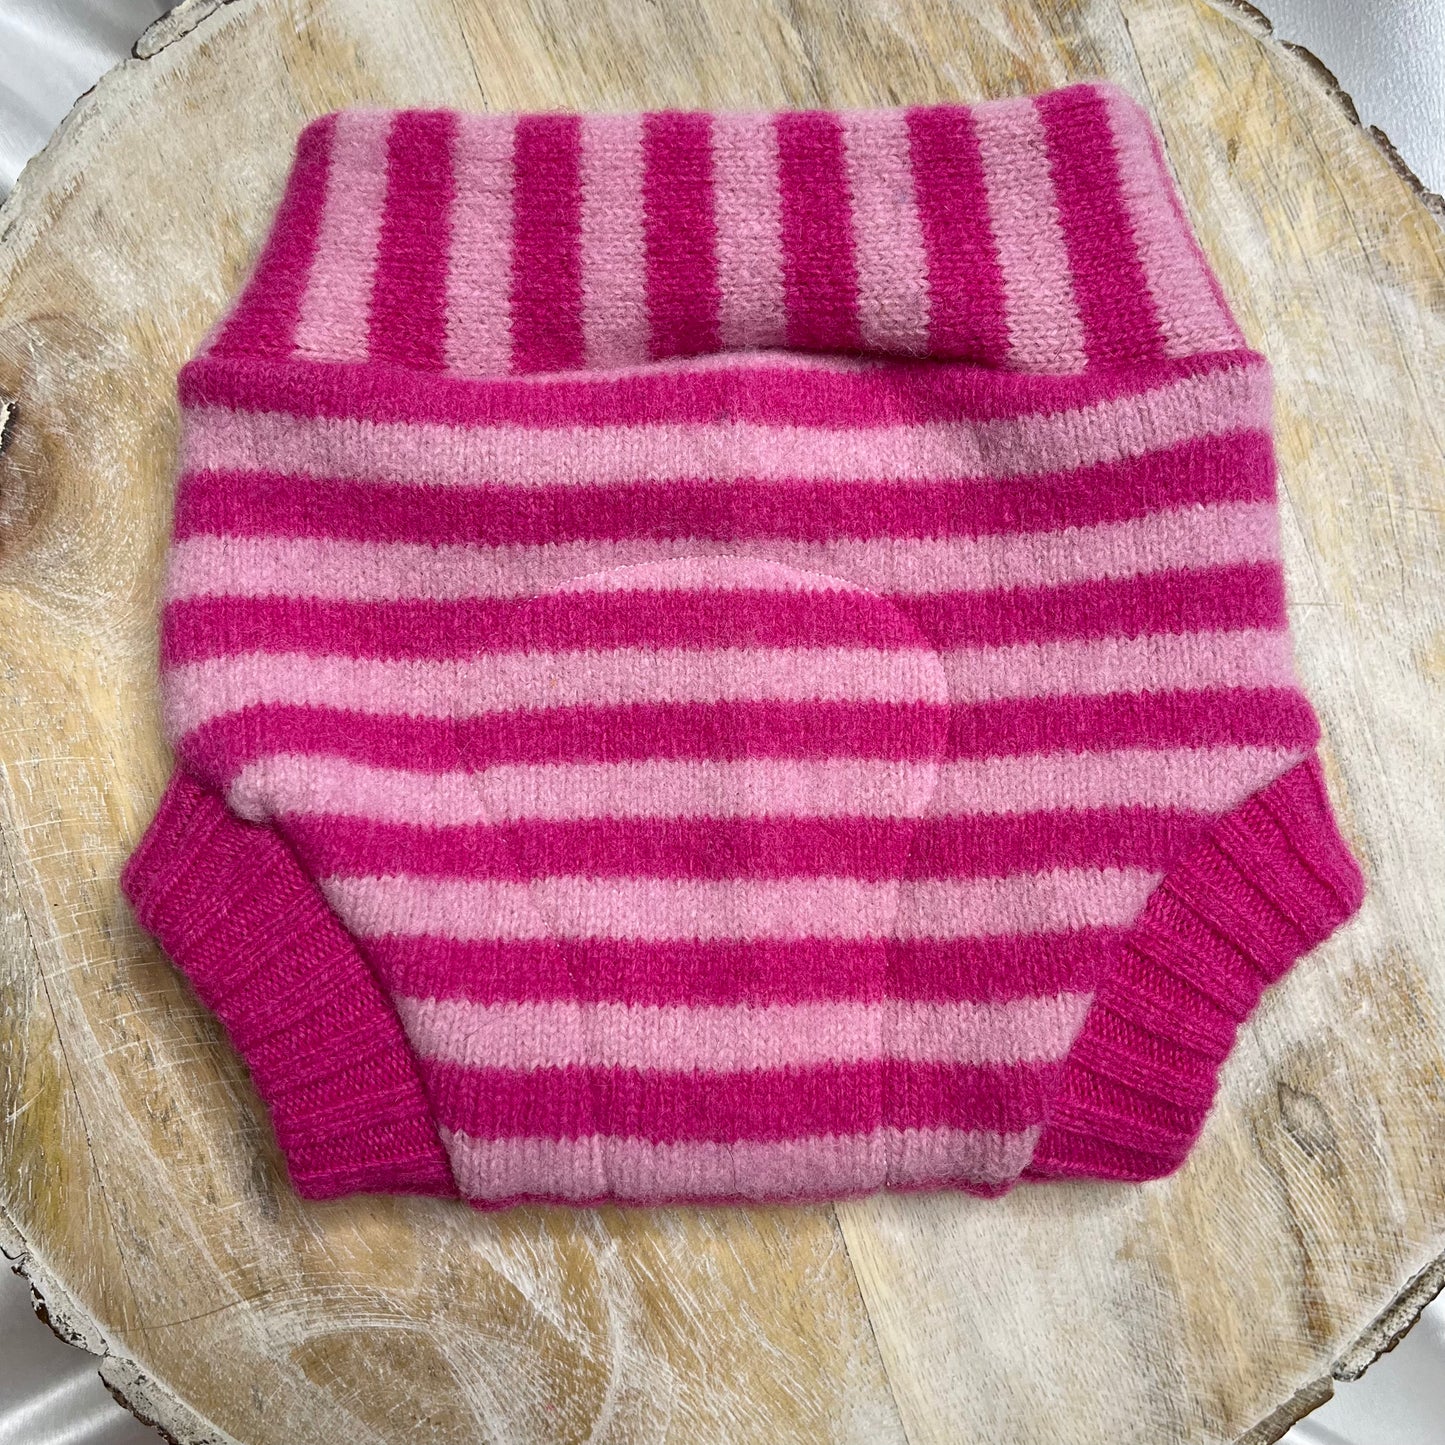 Upcycled Wool Cover - Size Newborn - Pink Stripes